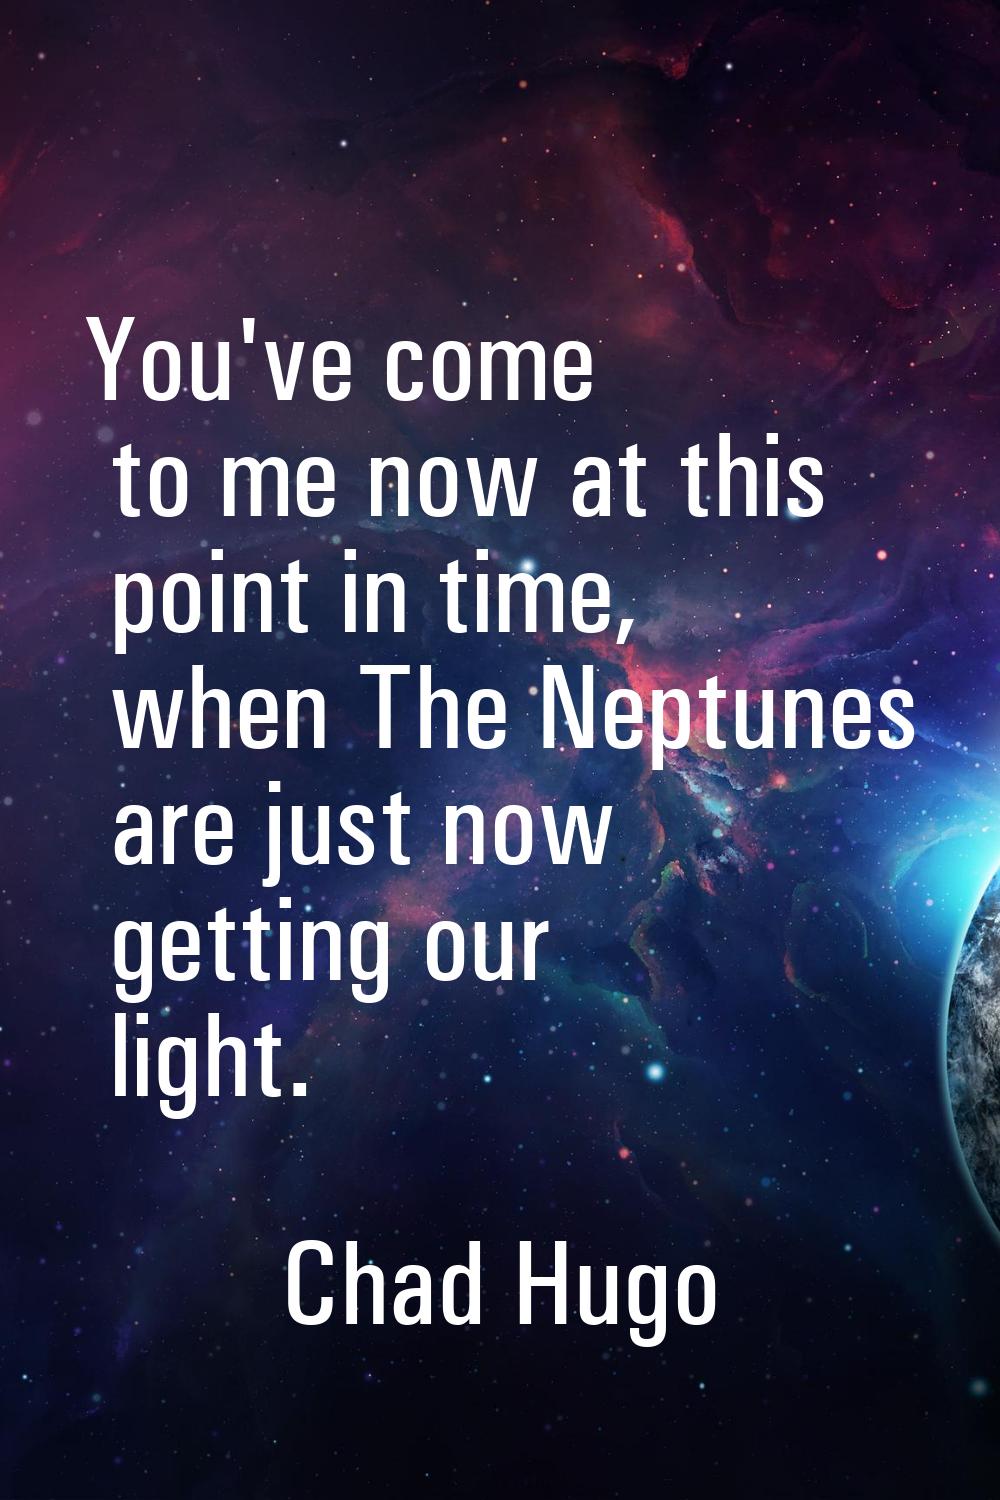 You've come to me now at this point in time, when The Neptunes are just now getting our light.